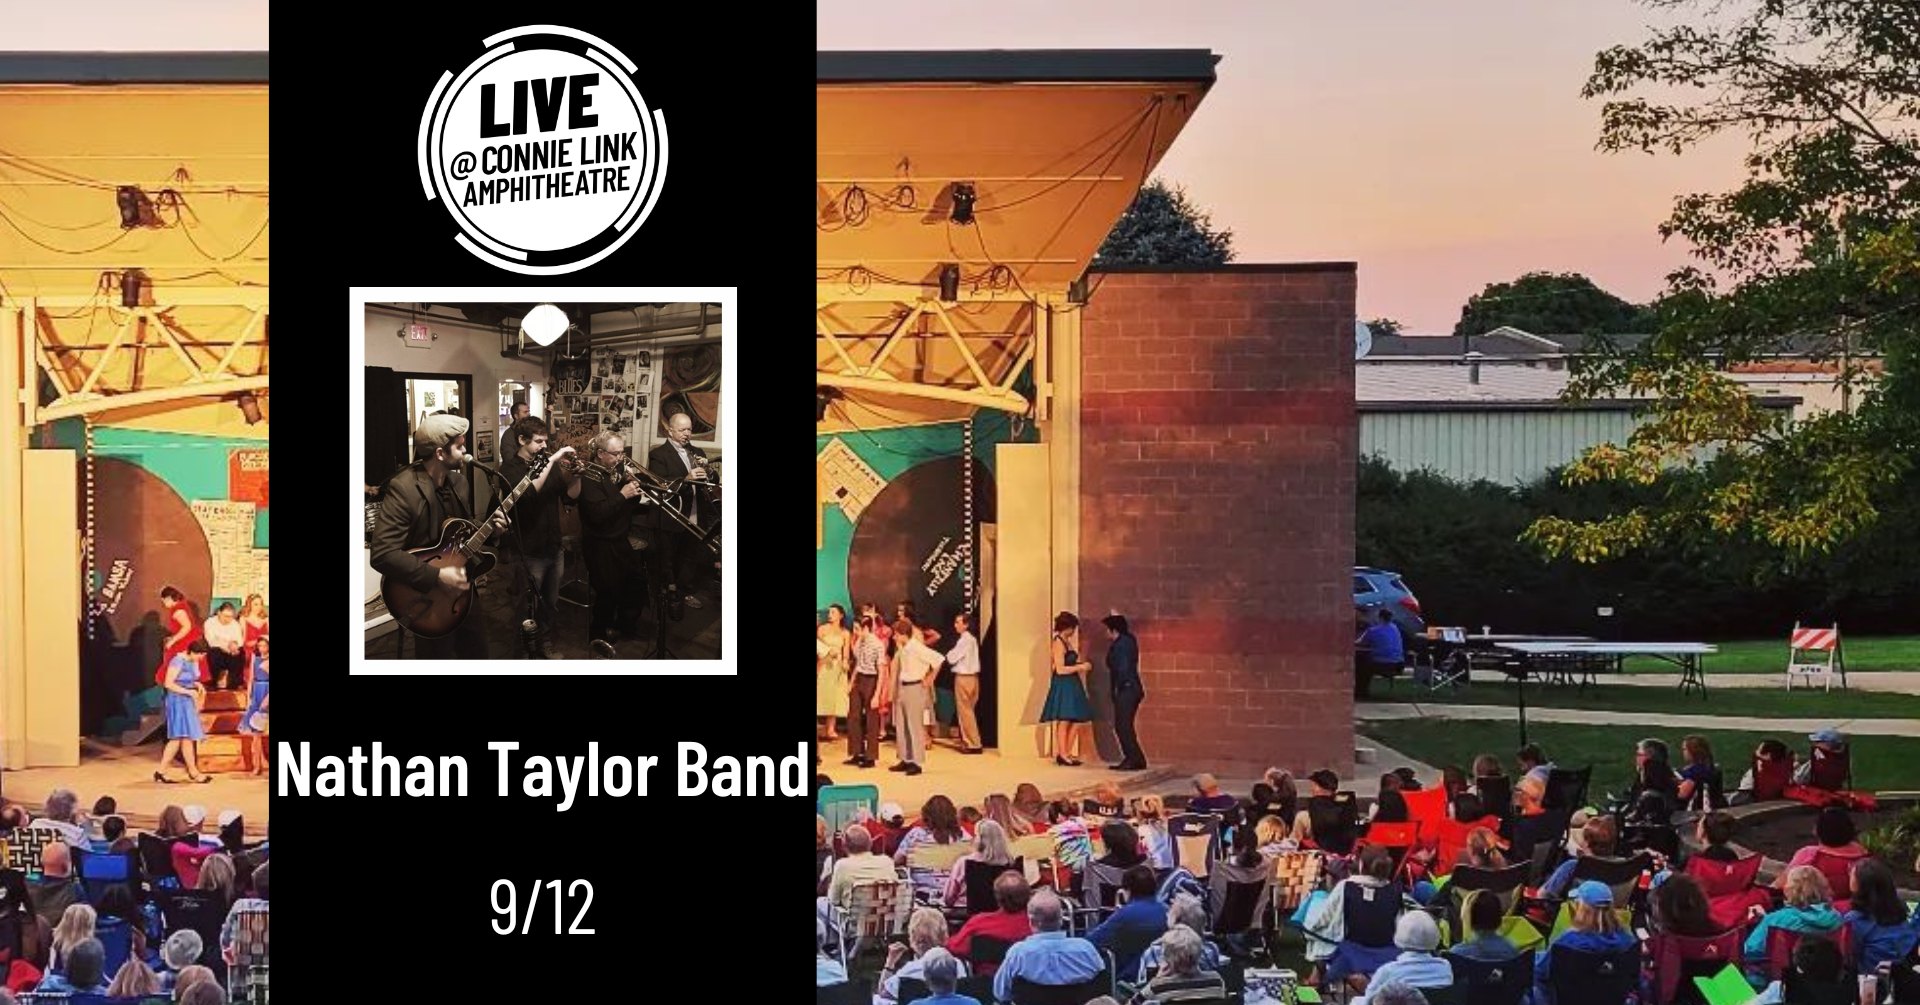 Normal LIVE presents Nathan Taylor Band @ Connie Link Amphitheatre